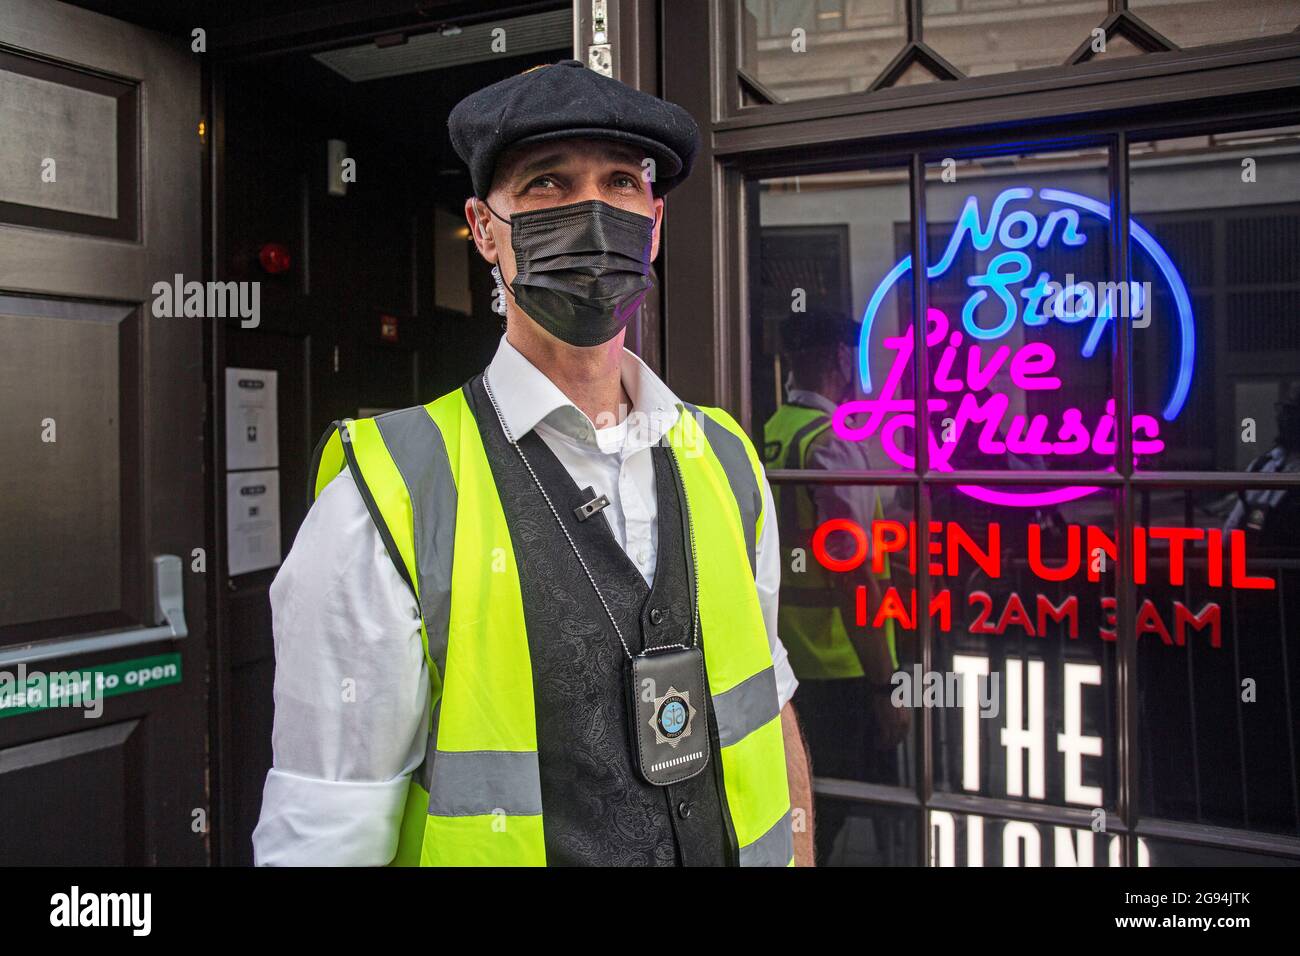 Michael security guard at 'The Piano Works 'a non-stop live music venue in London's West End ,United Kingdom. Stock Photo